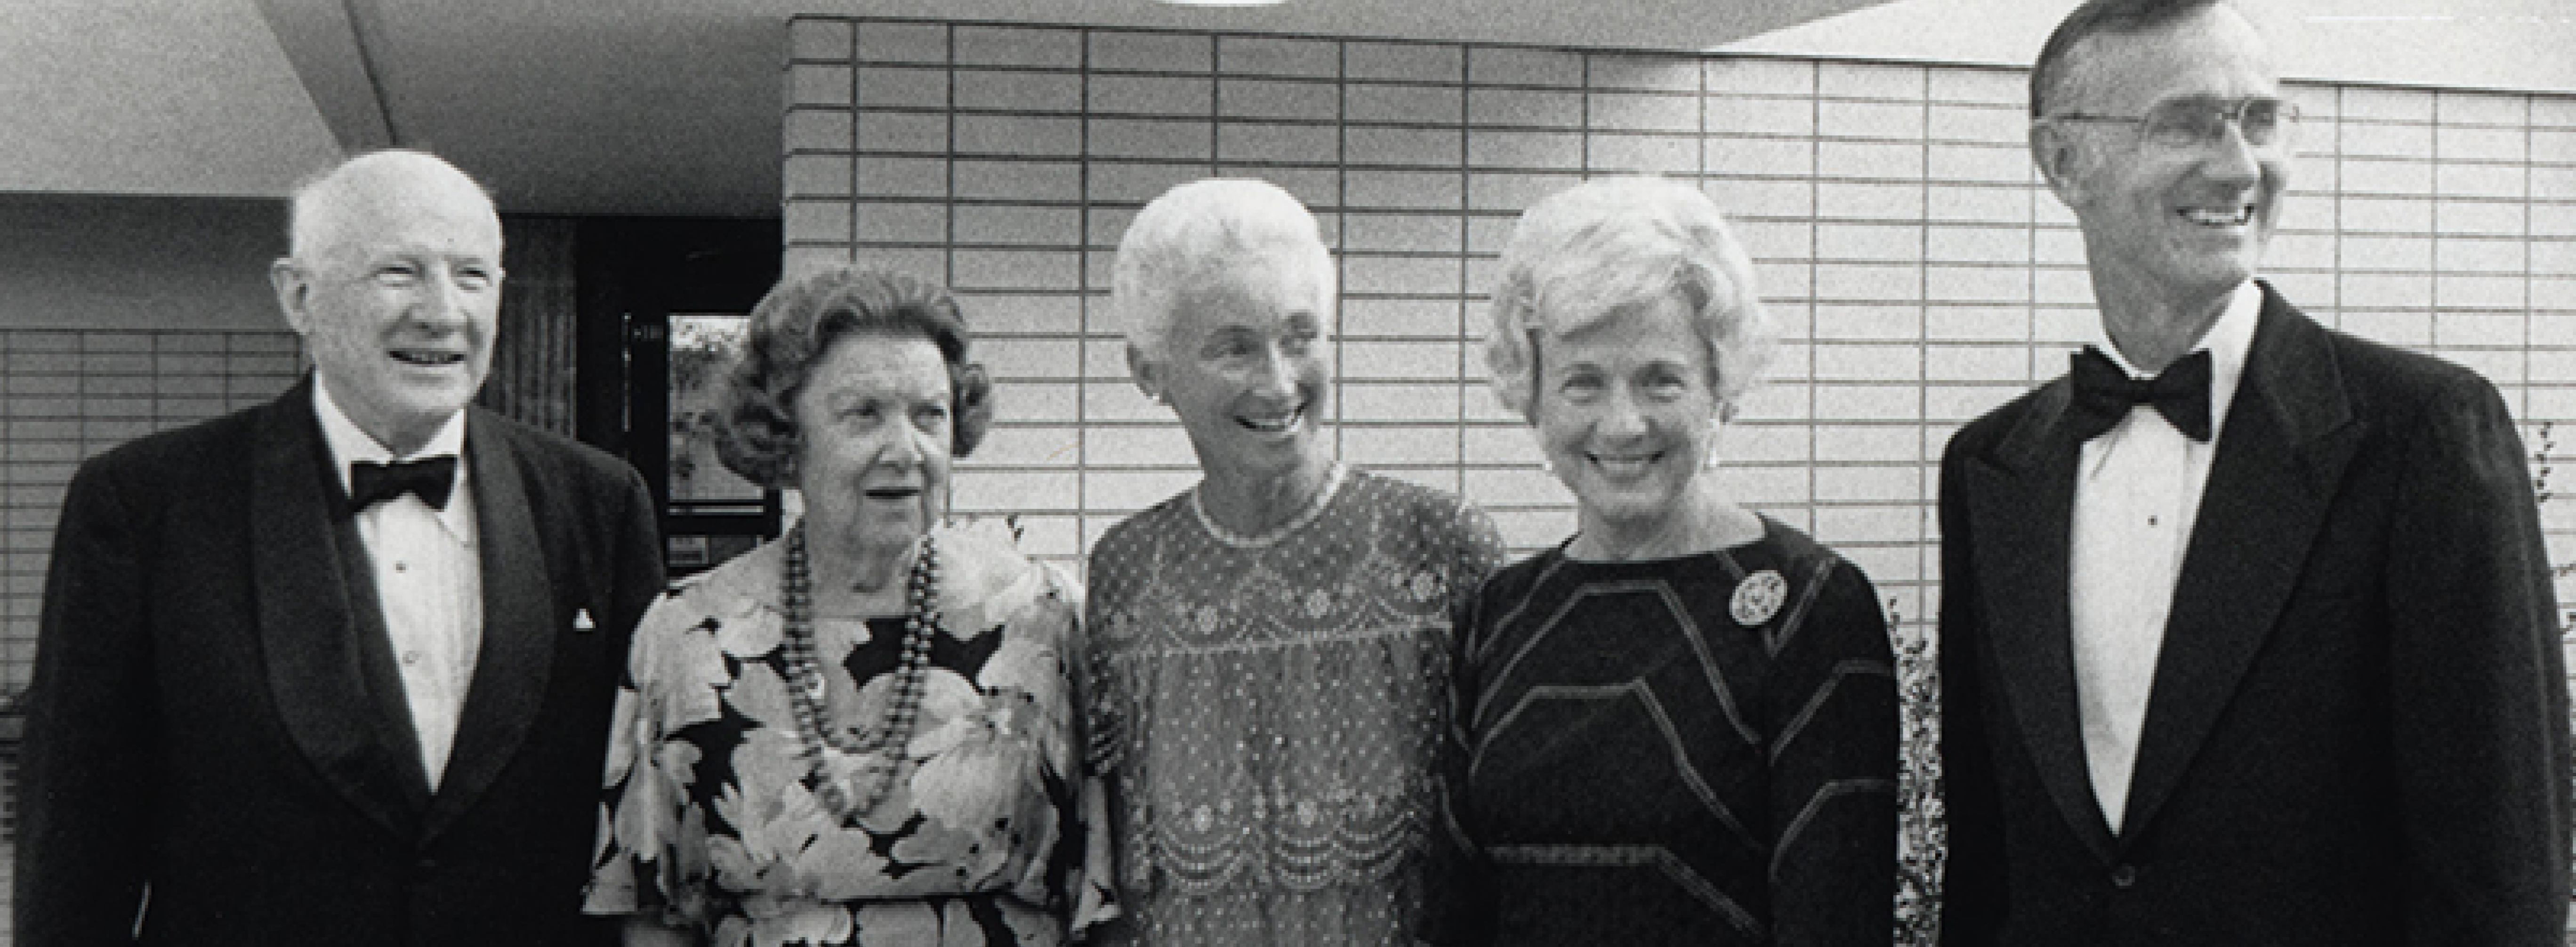 Marian Miner Cook, Jack and Jill Stark, and Bernice and Donald McKenna at Gala Opening: 1983